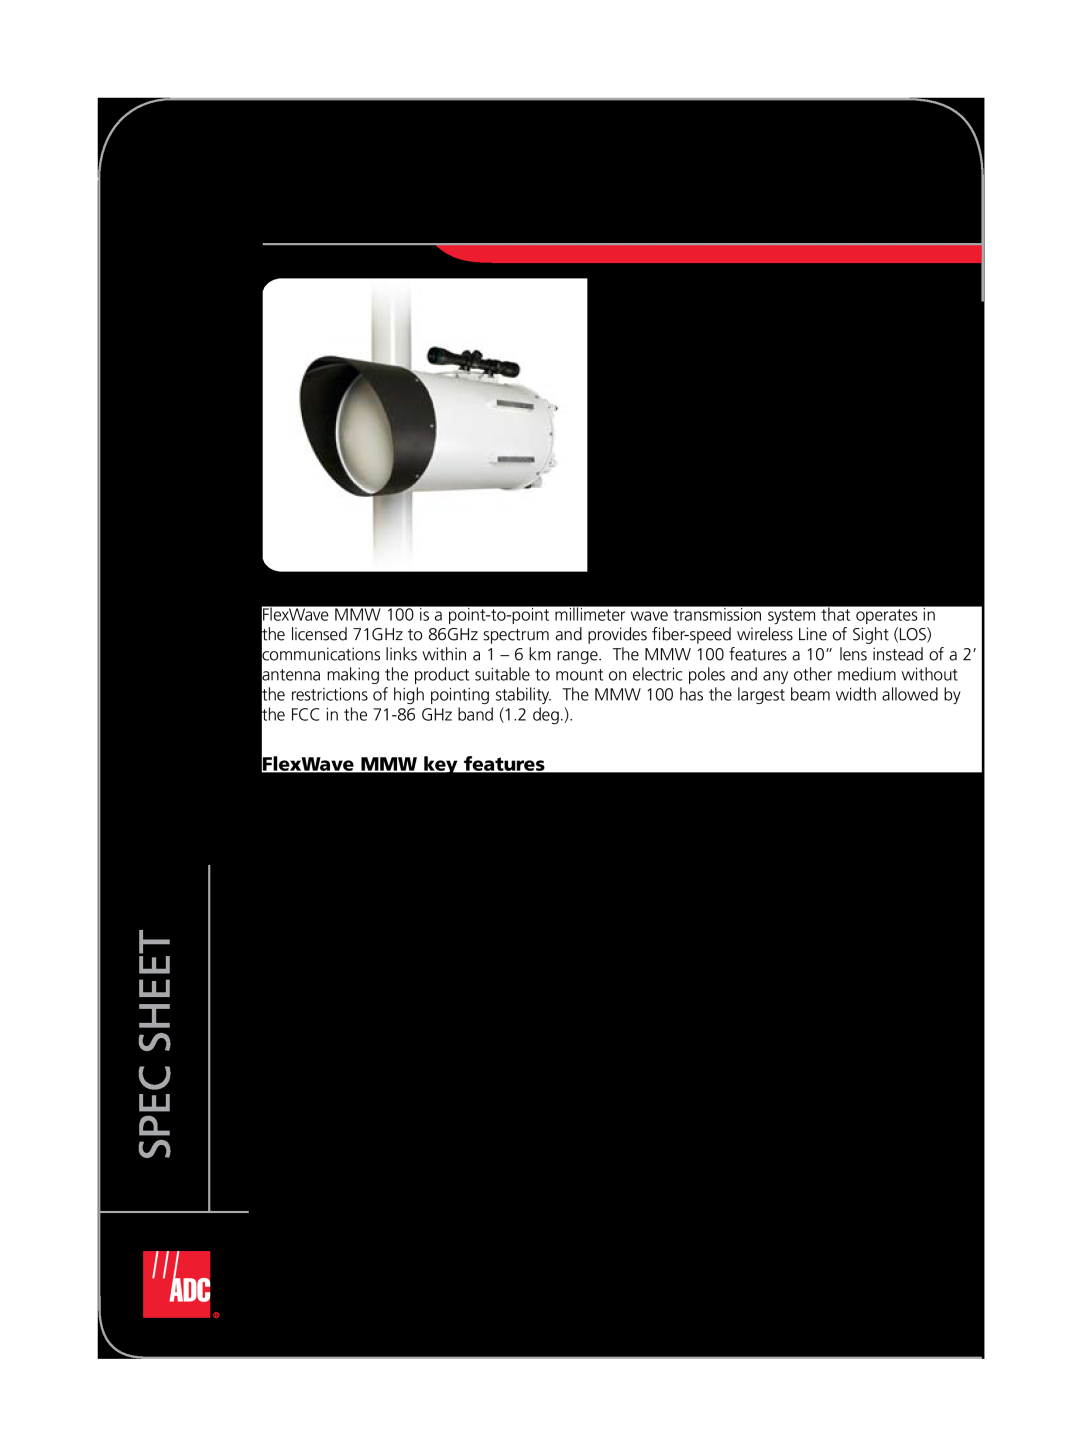 ADC MMW 100 manual Millimeter Wave Transmission System, Spec Sheet, FlexWave MMW key features 